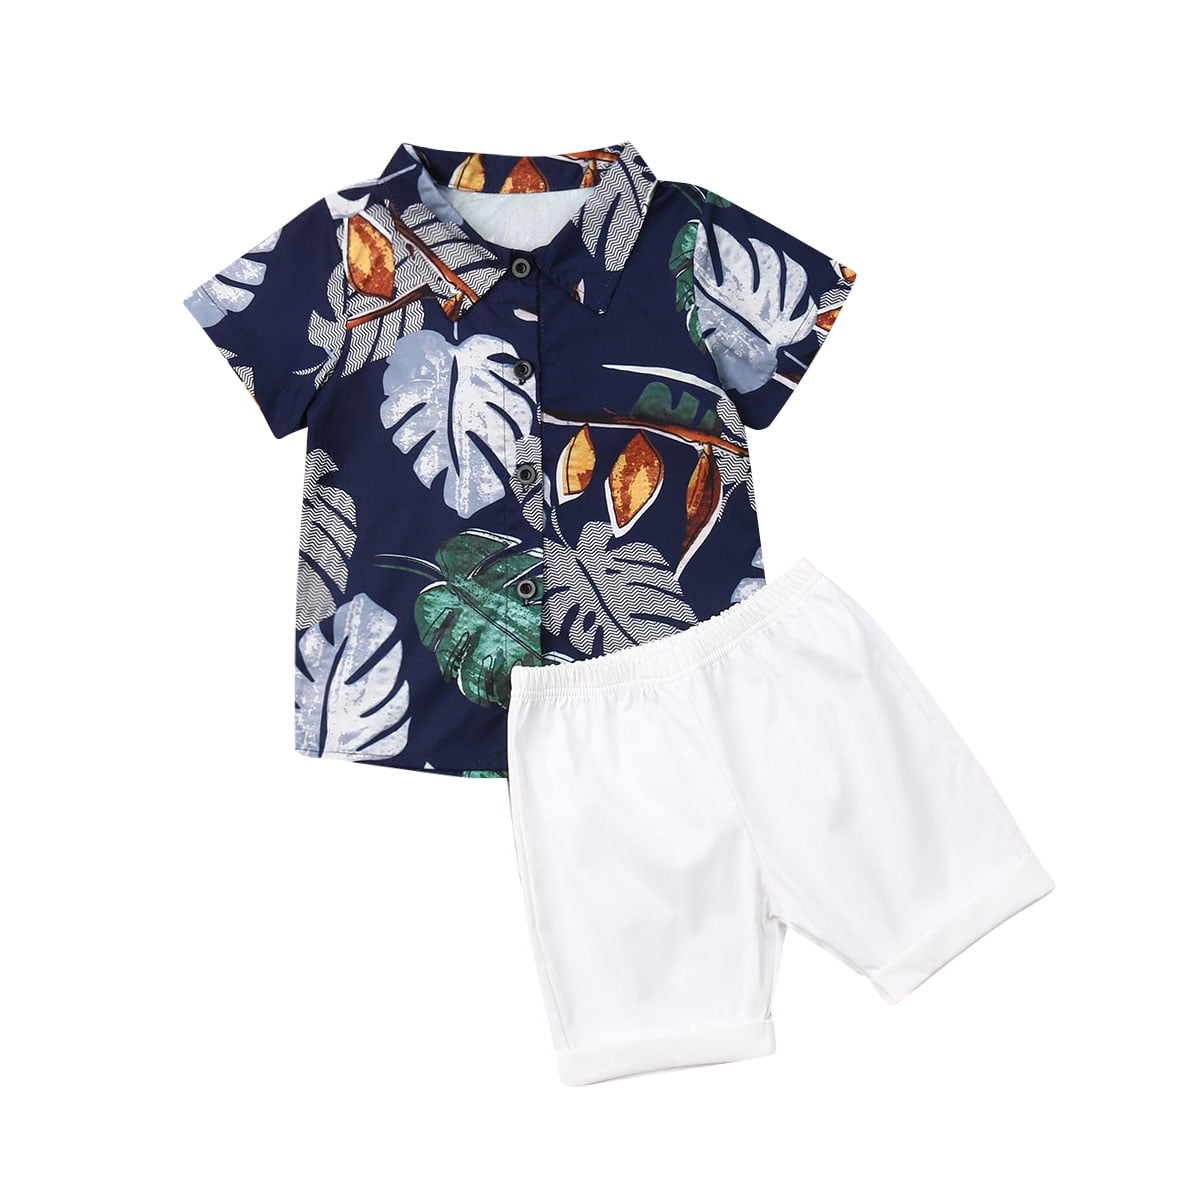 SKU175 Boys summer outfit.shorts and t-shirt blue casual set 18M-6YEARS